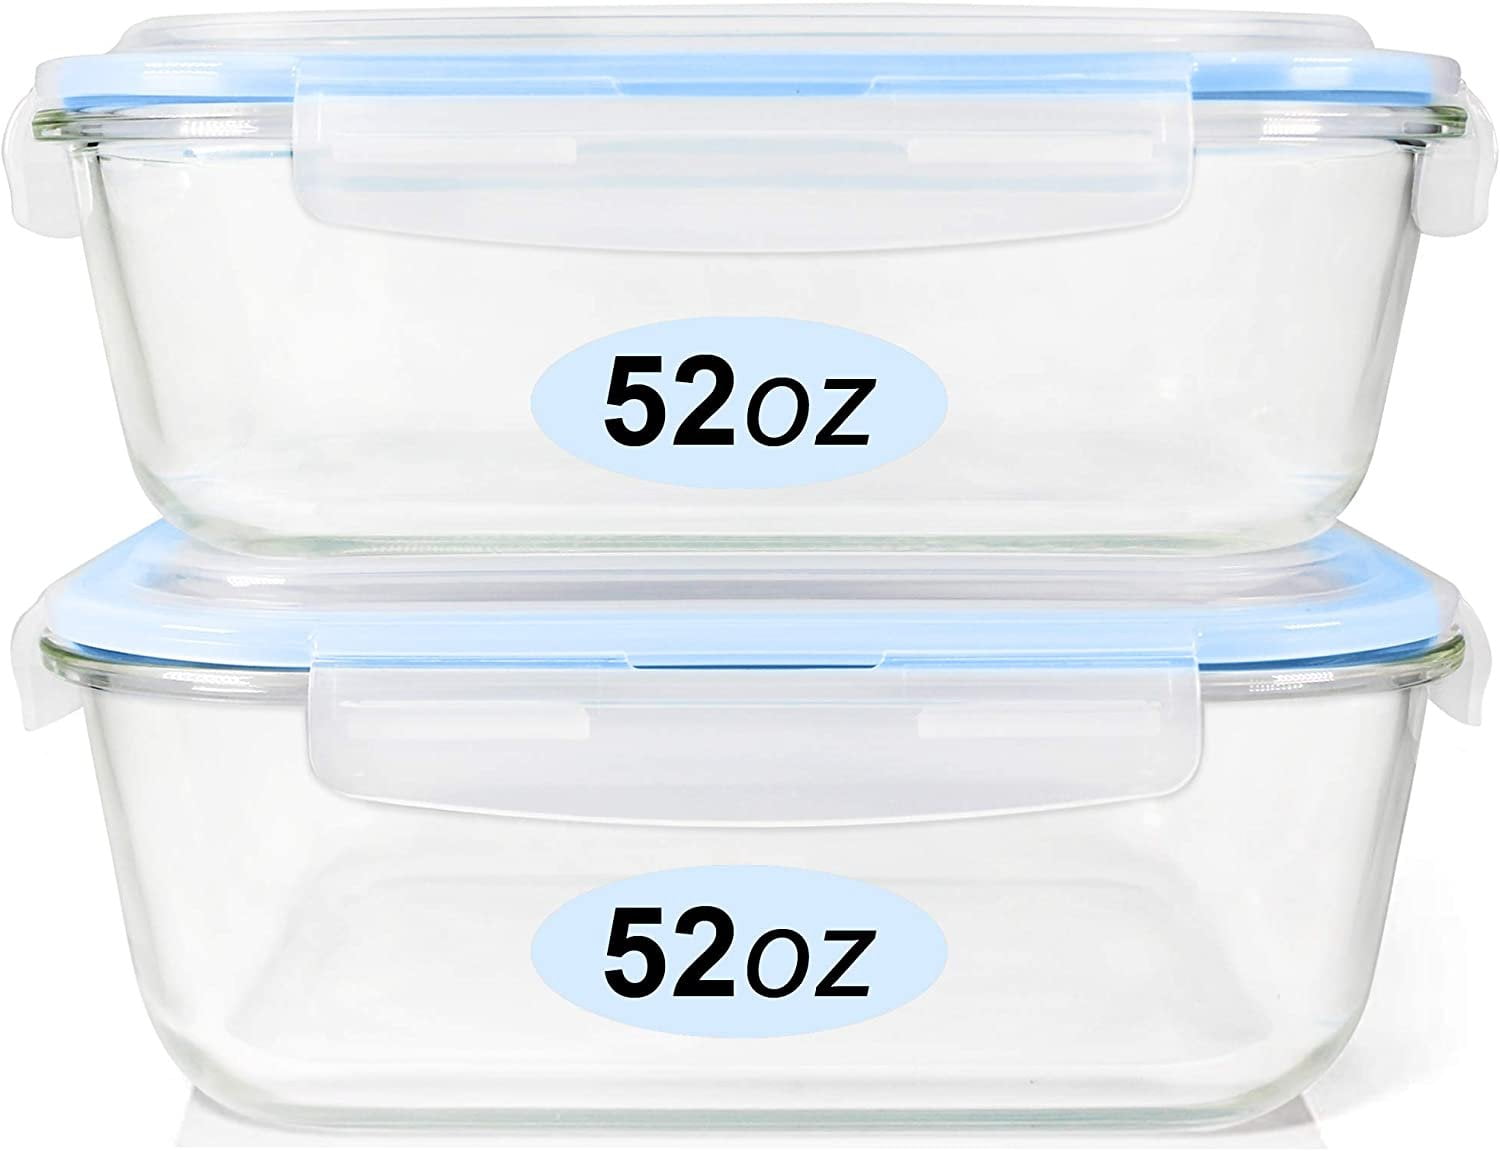 KOMUEE 5 Packs 36 Oz Glass Meal Prep Containers 2 Compartments, Airtight  Glass Lunch Bento Box with Lids, Glass Food Storage Containers, BPA Free